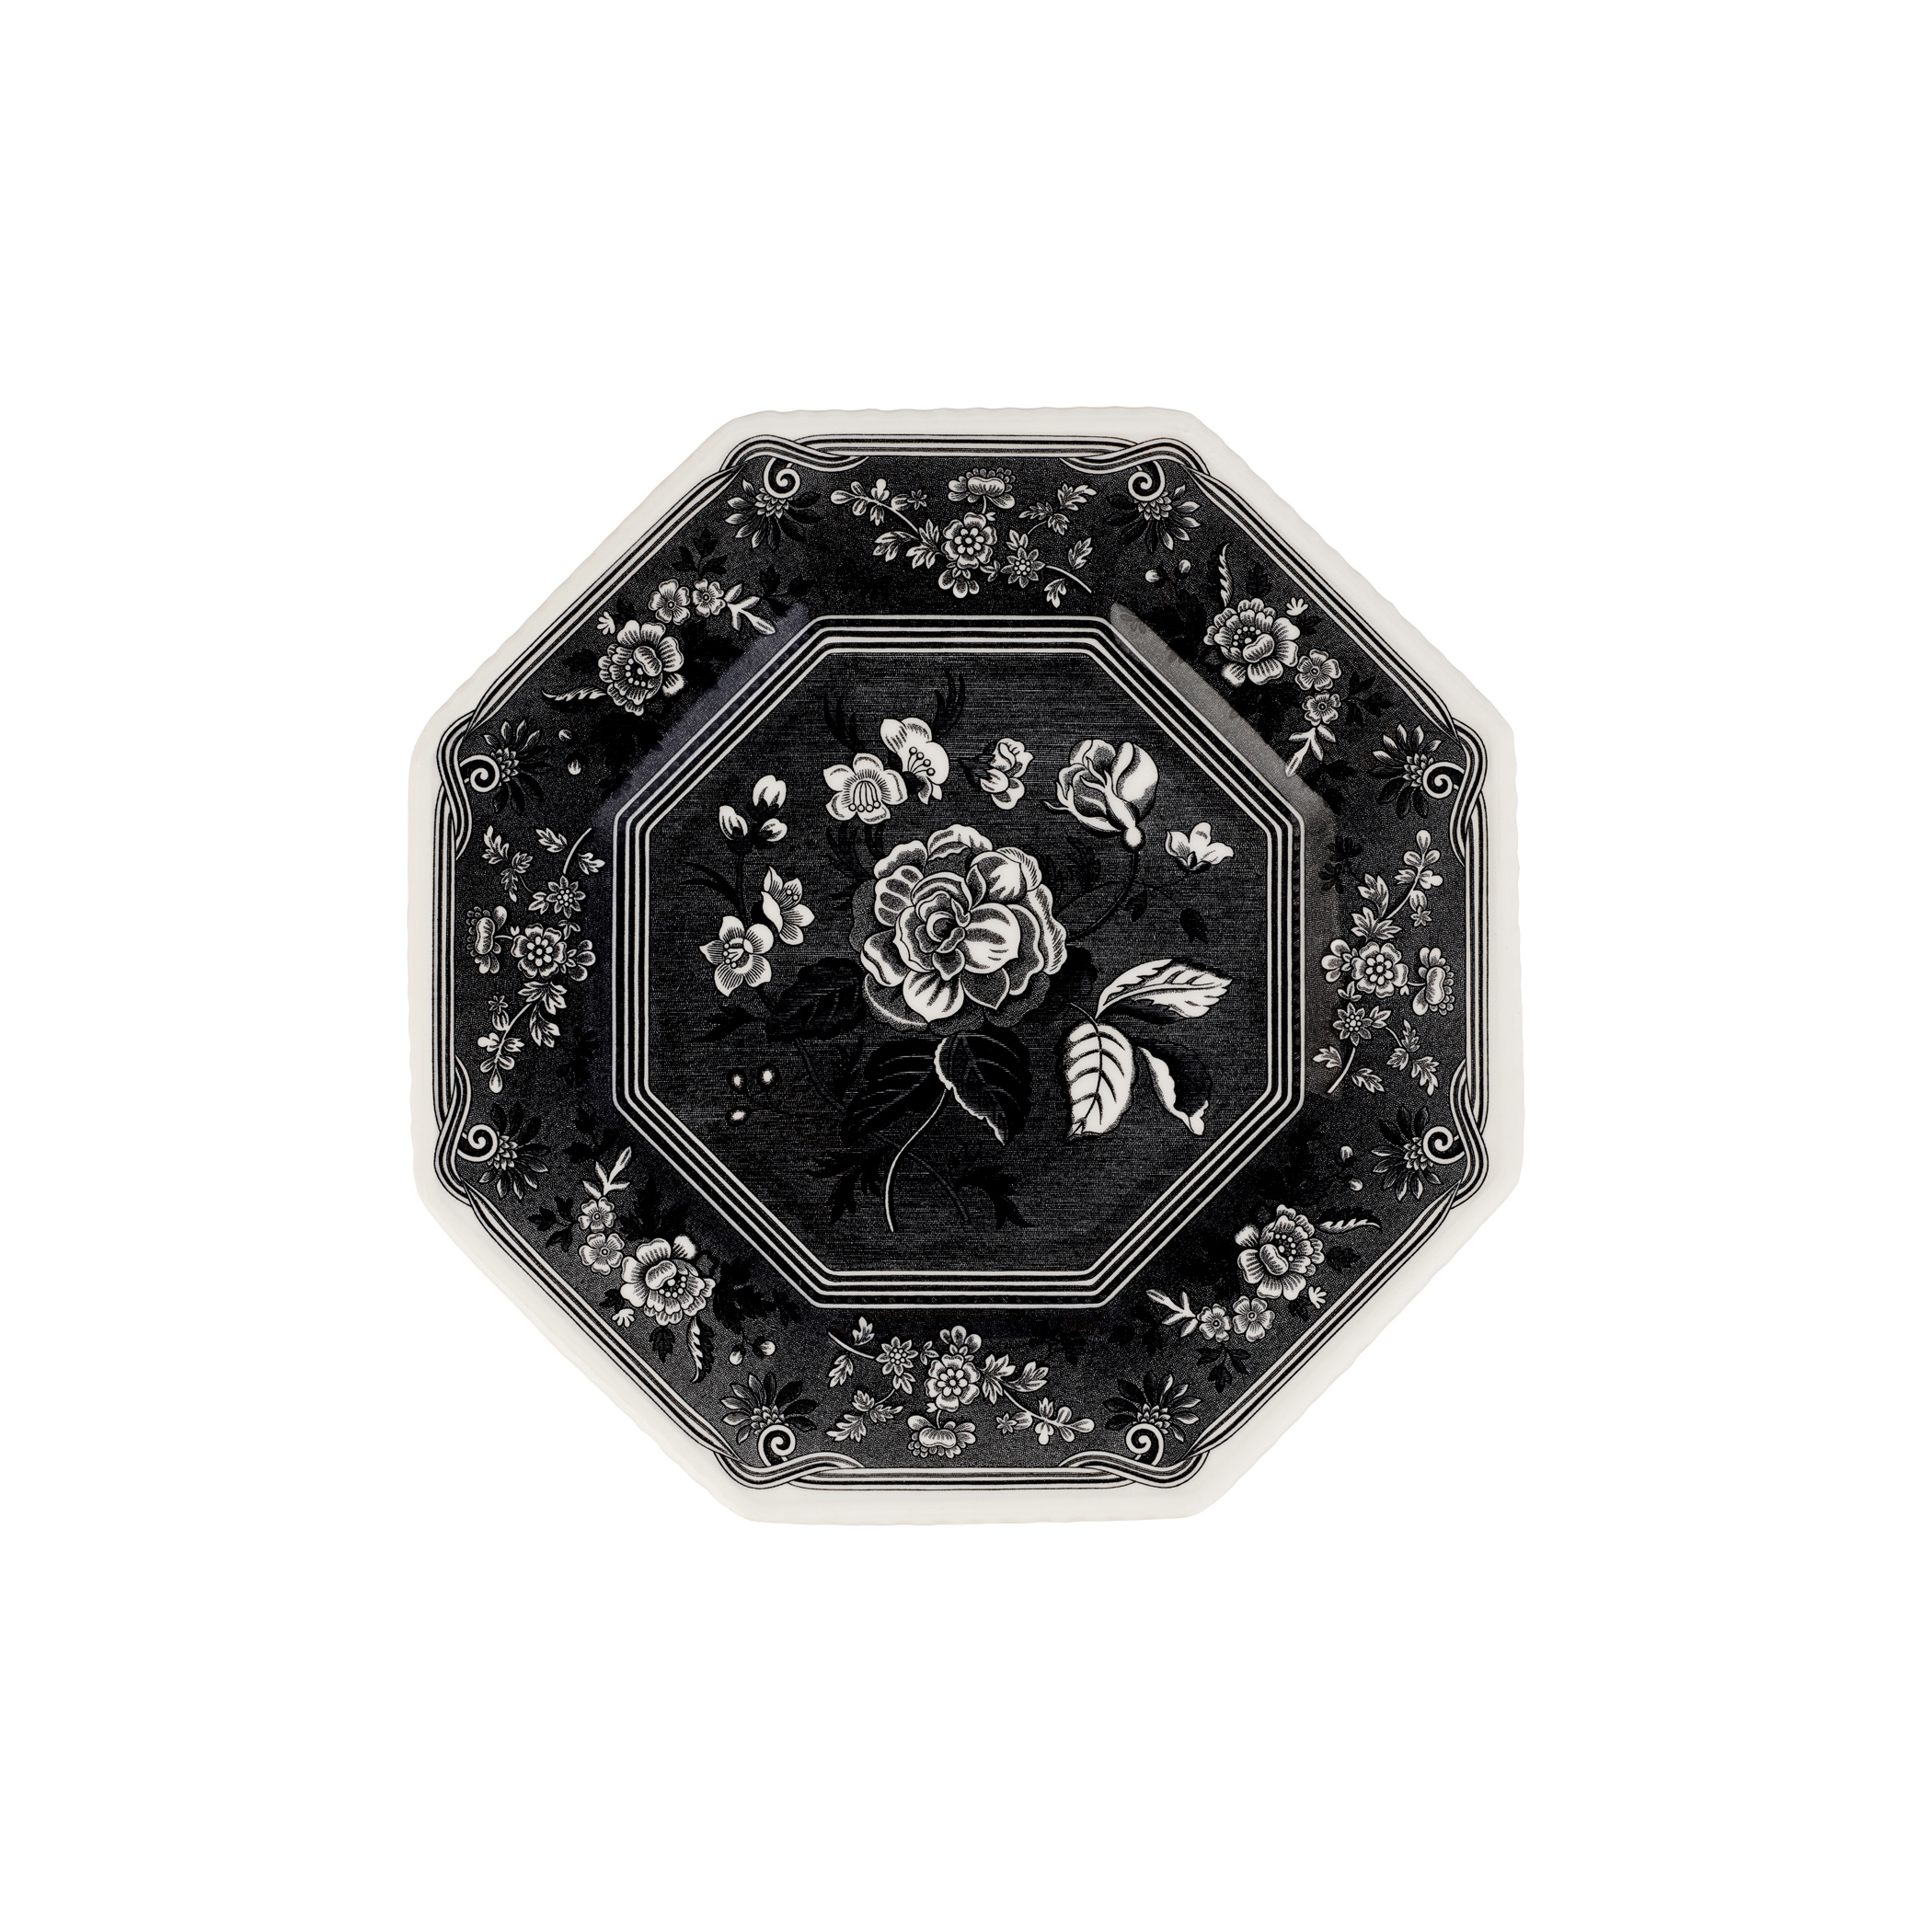 Heritage Octagonal Plate 9.5 Inch (Botanical) image number null